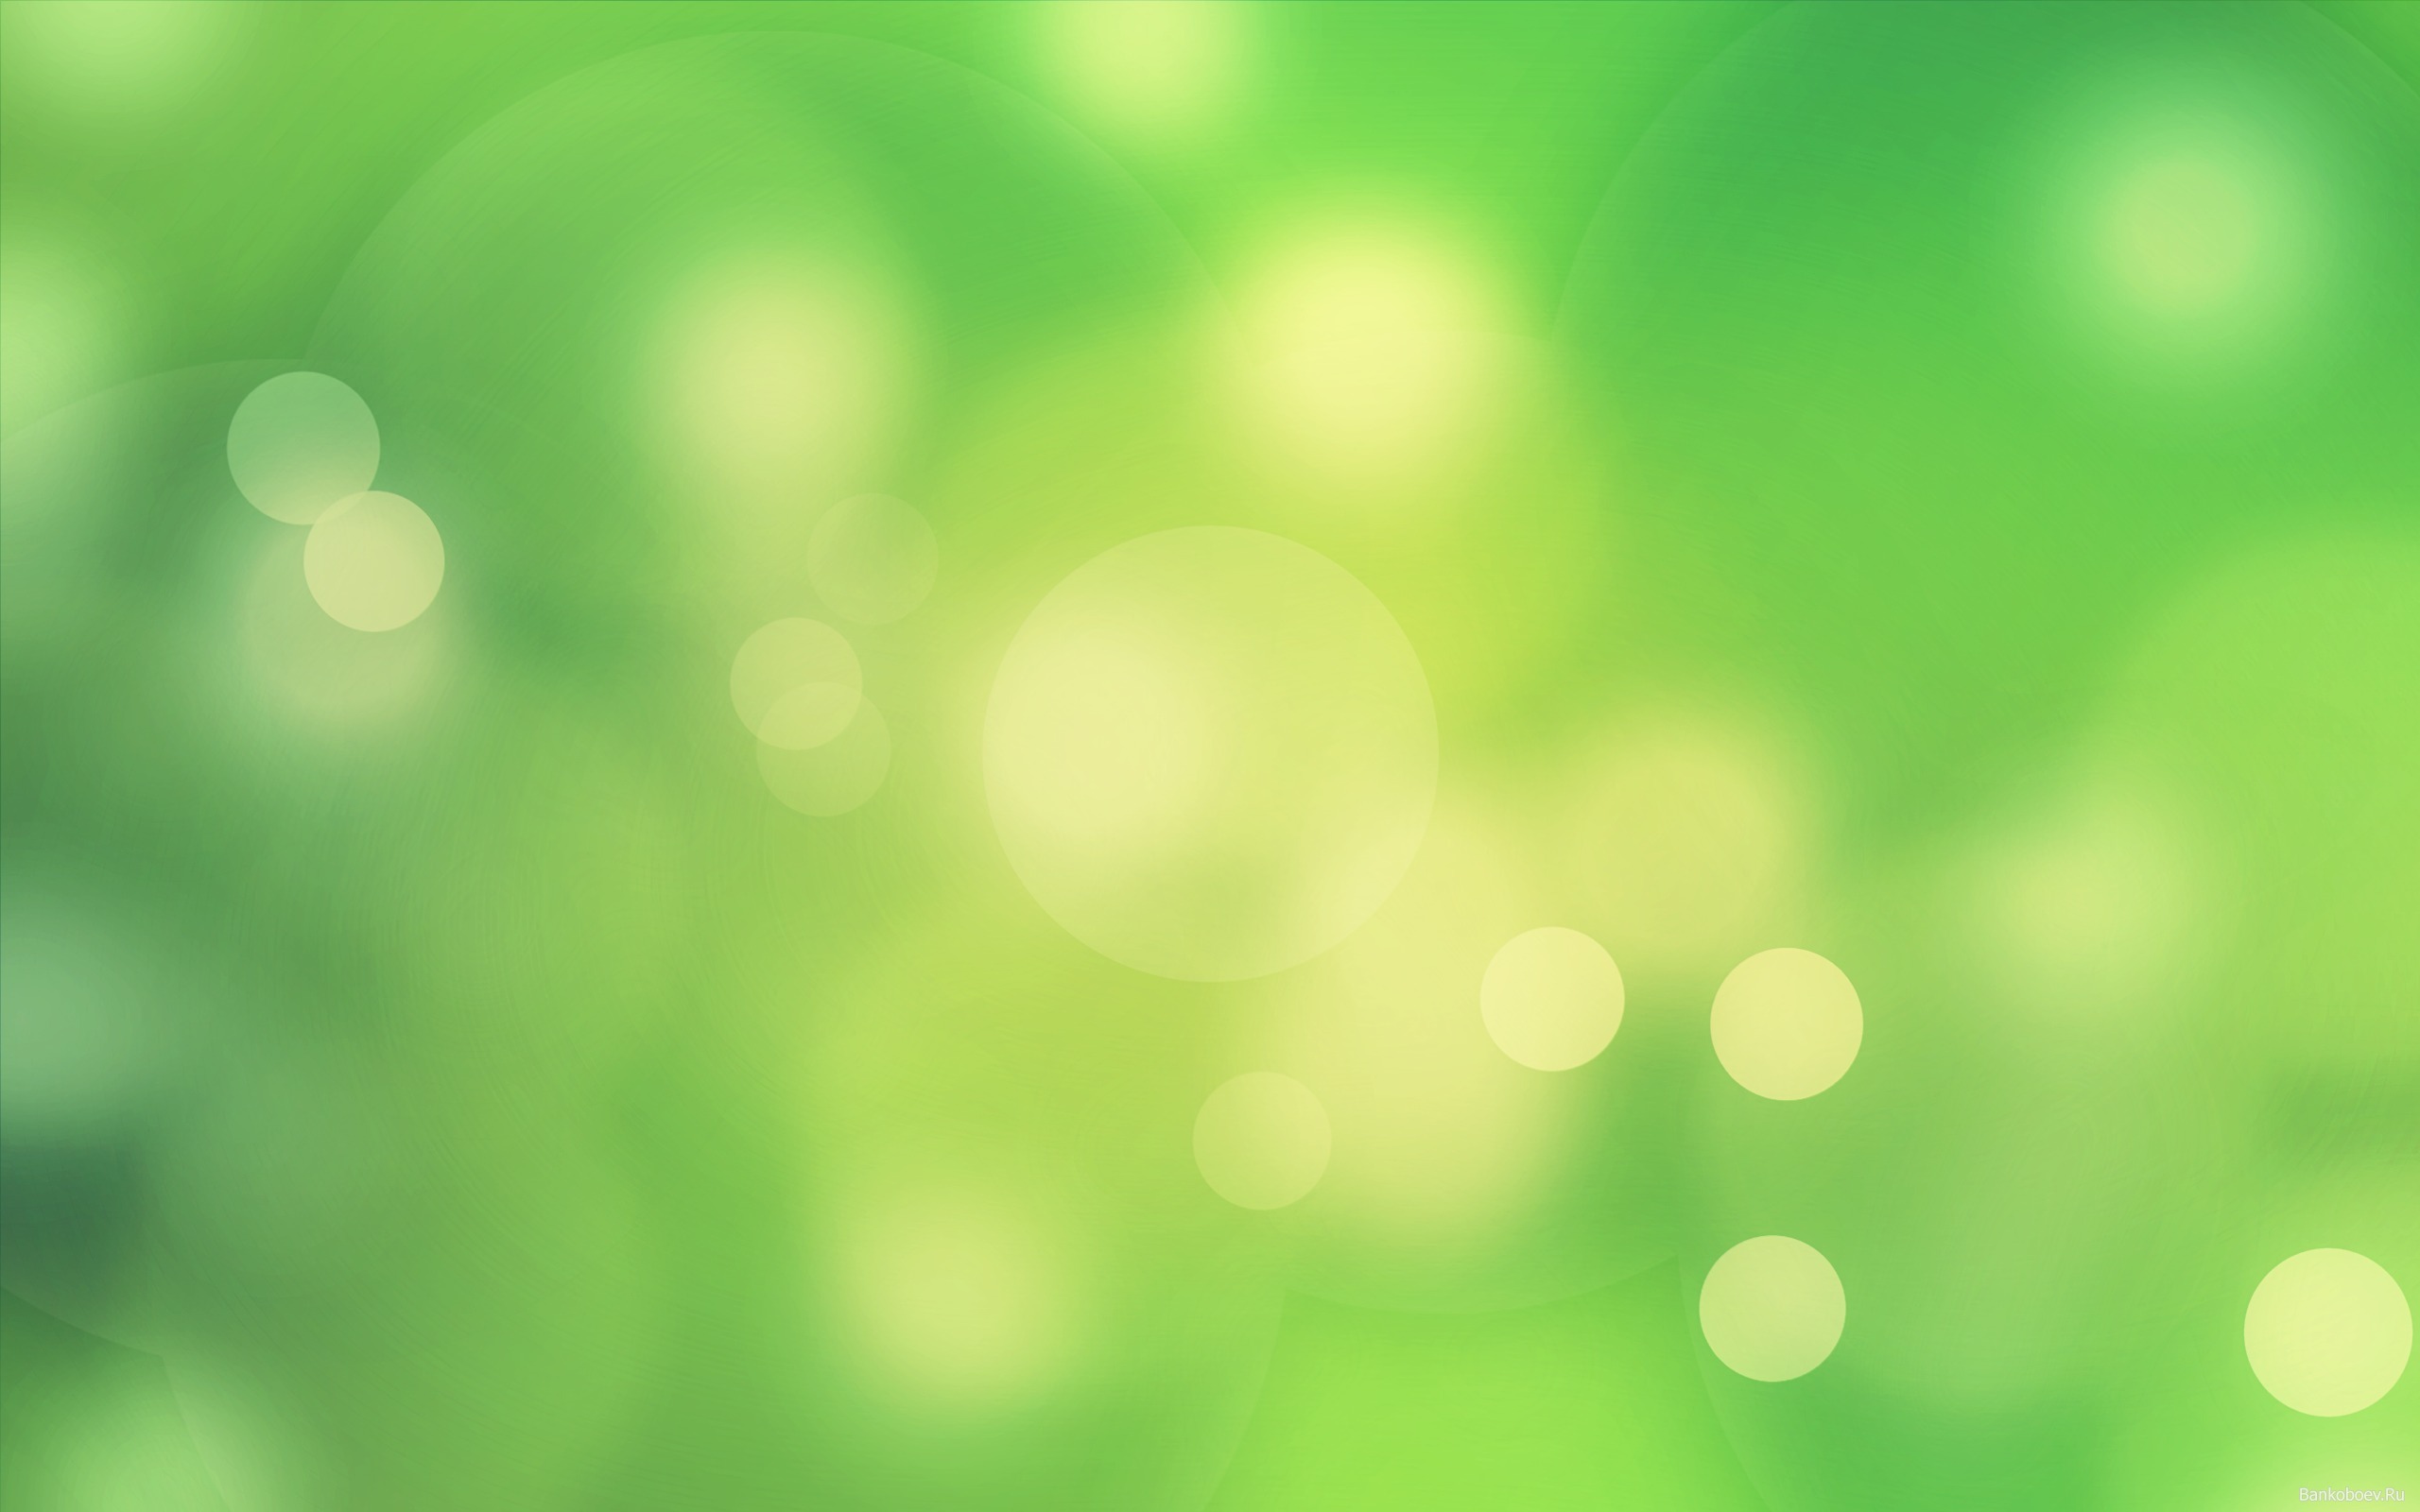 Green Blurry Dots backgrounds